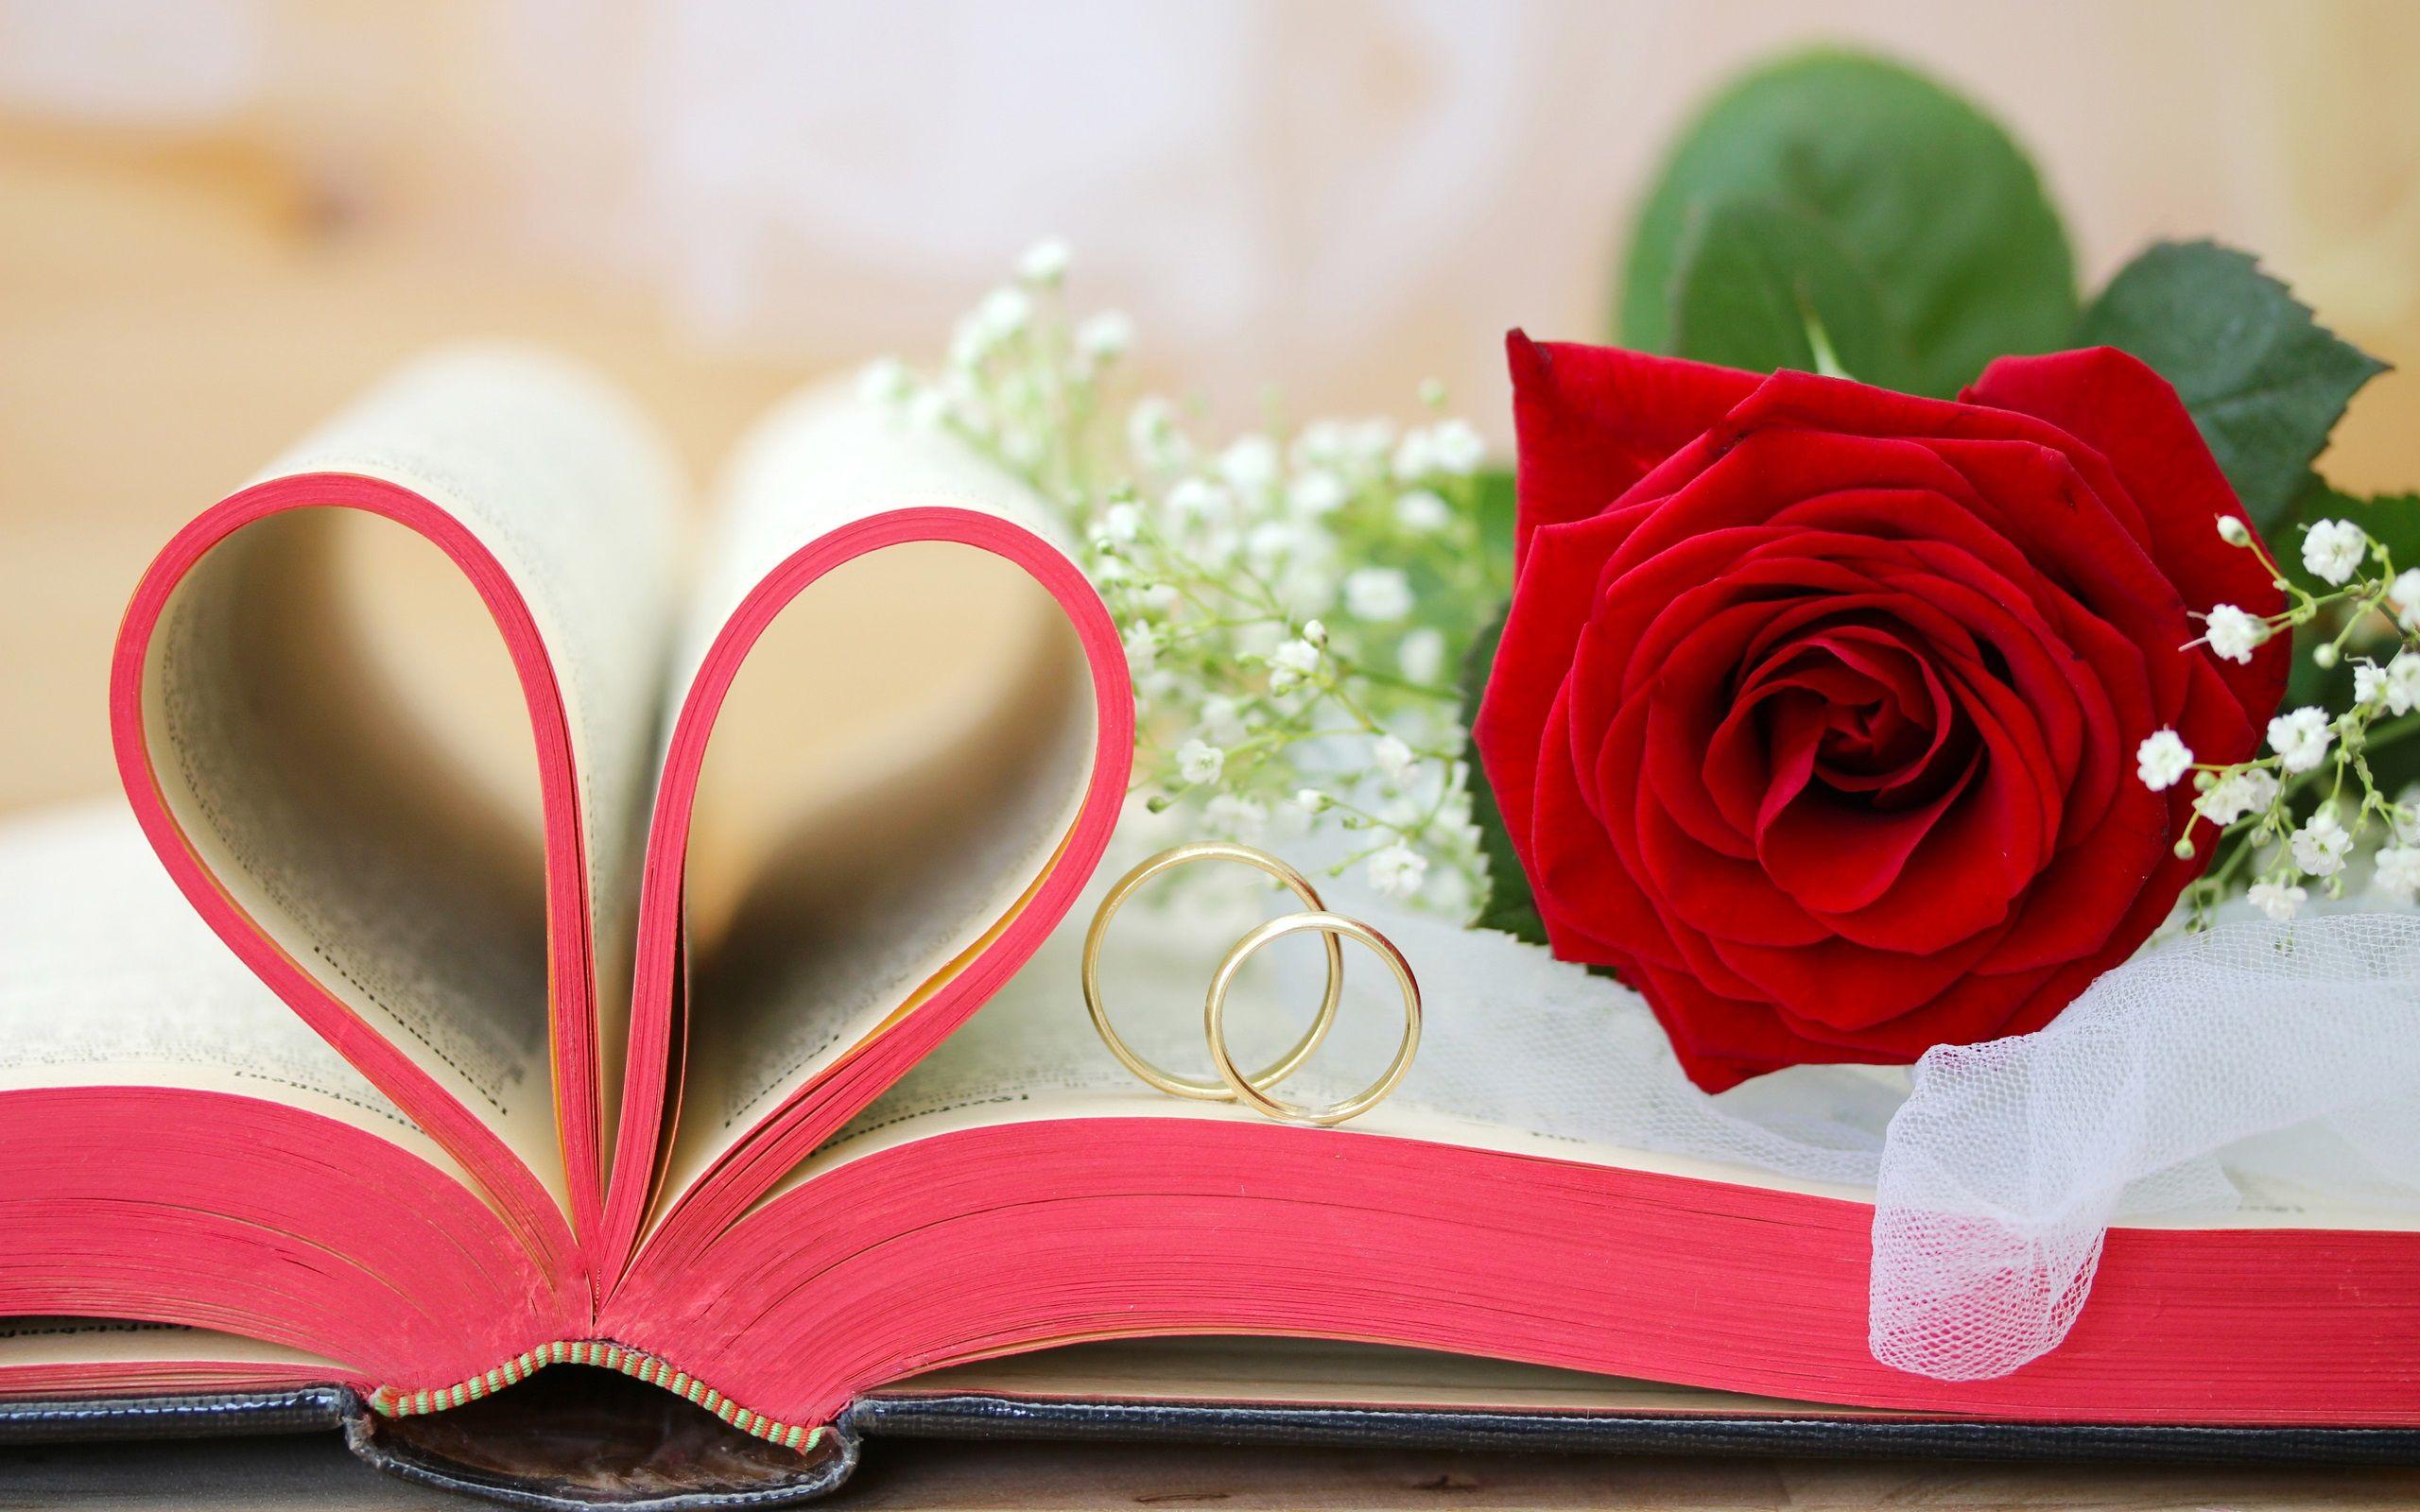 Red flowers, roses, Valentine's Day, book, love hearts, rings